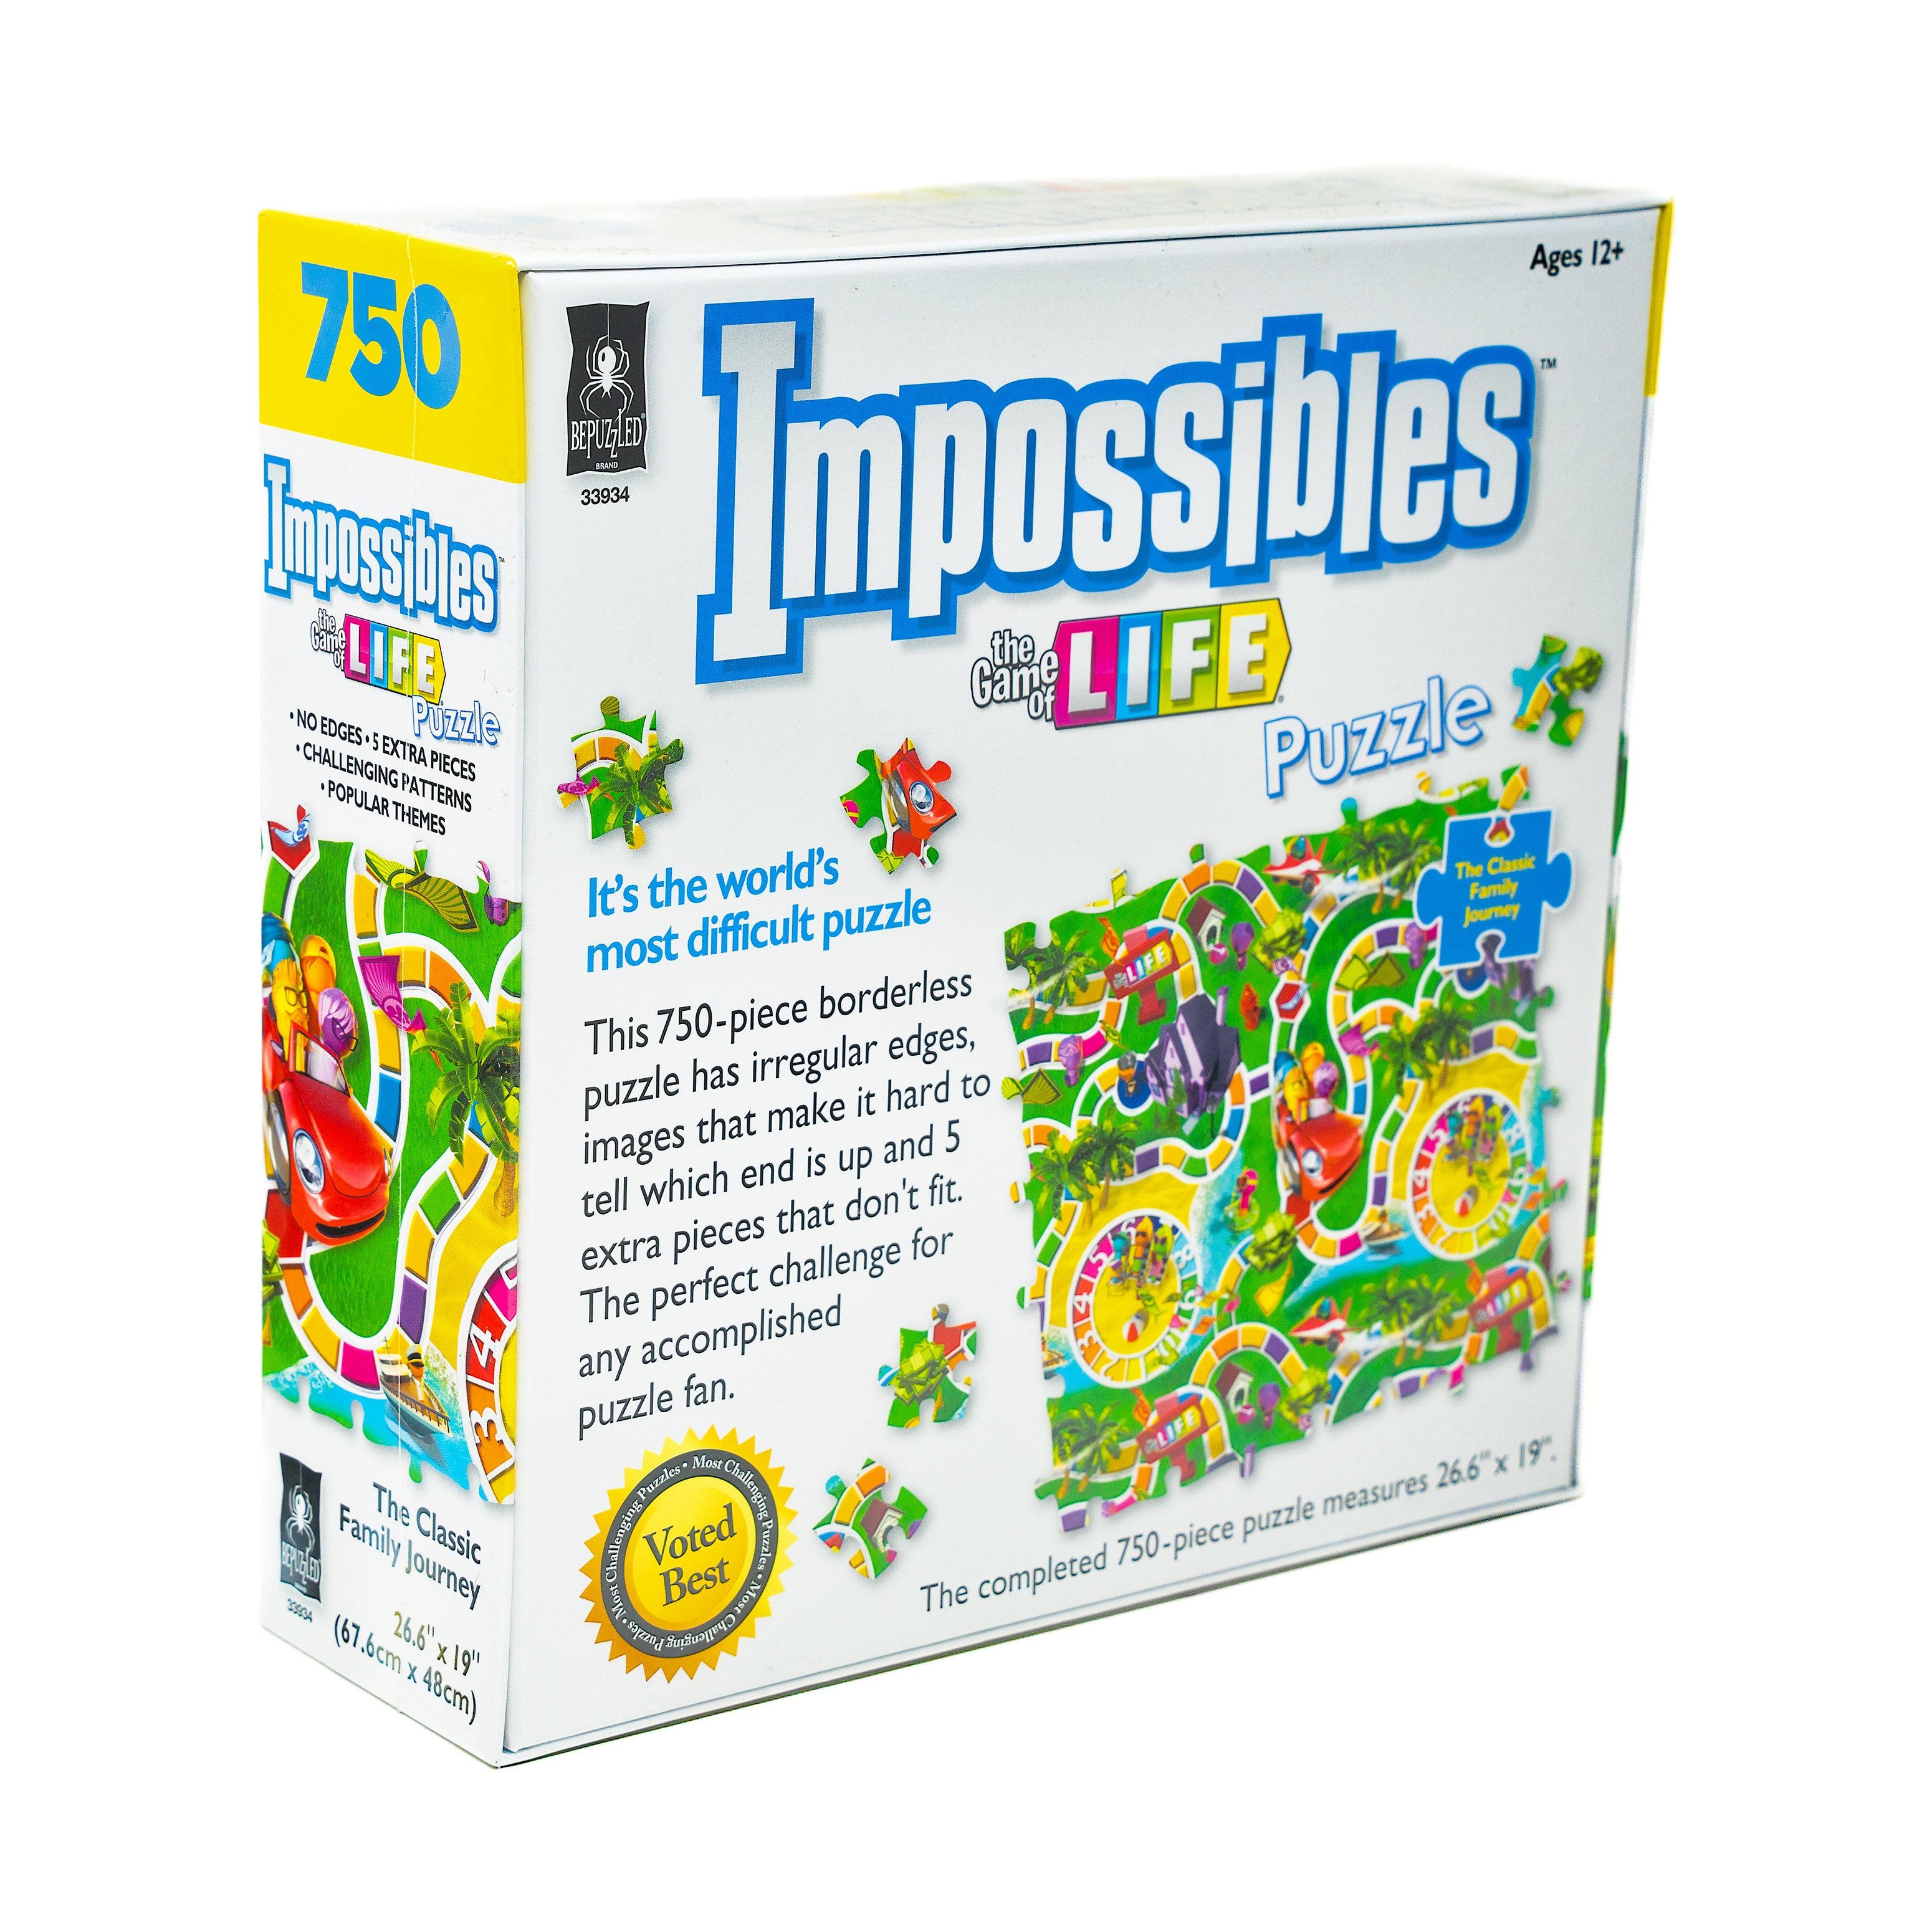 Impossibles Puzzle - Hasbro The Game of Life: 750 Pcs